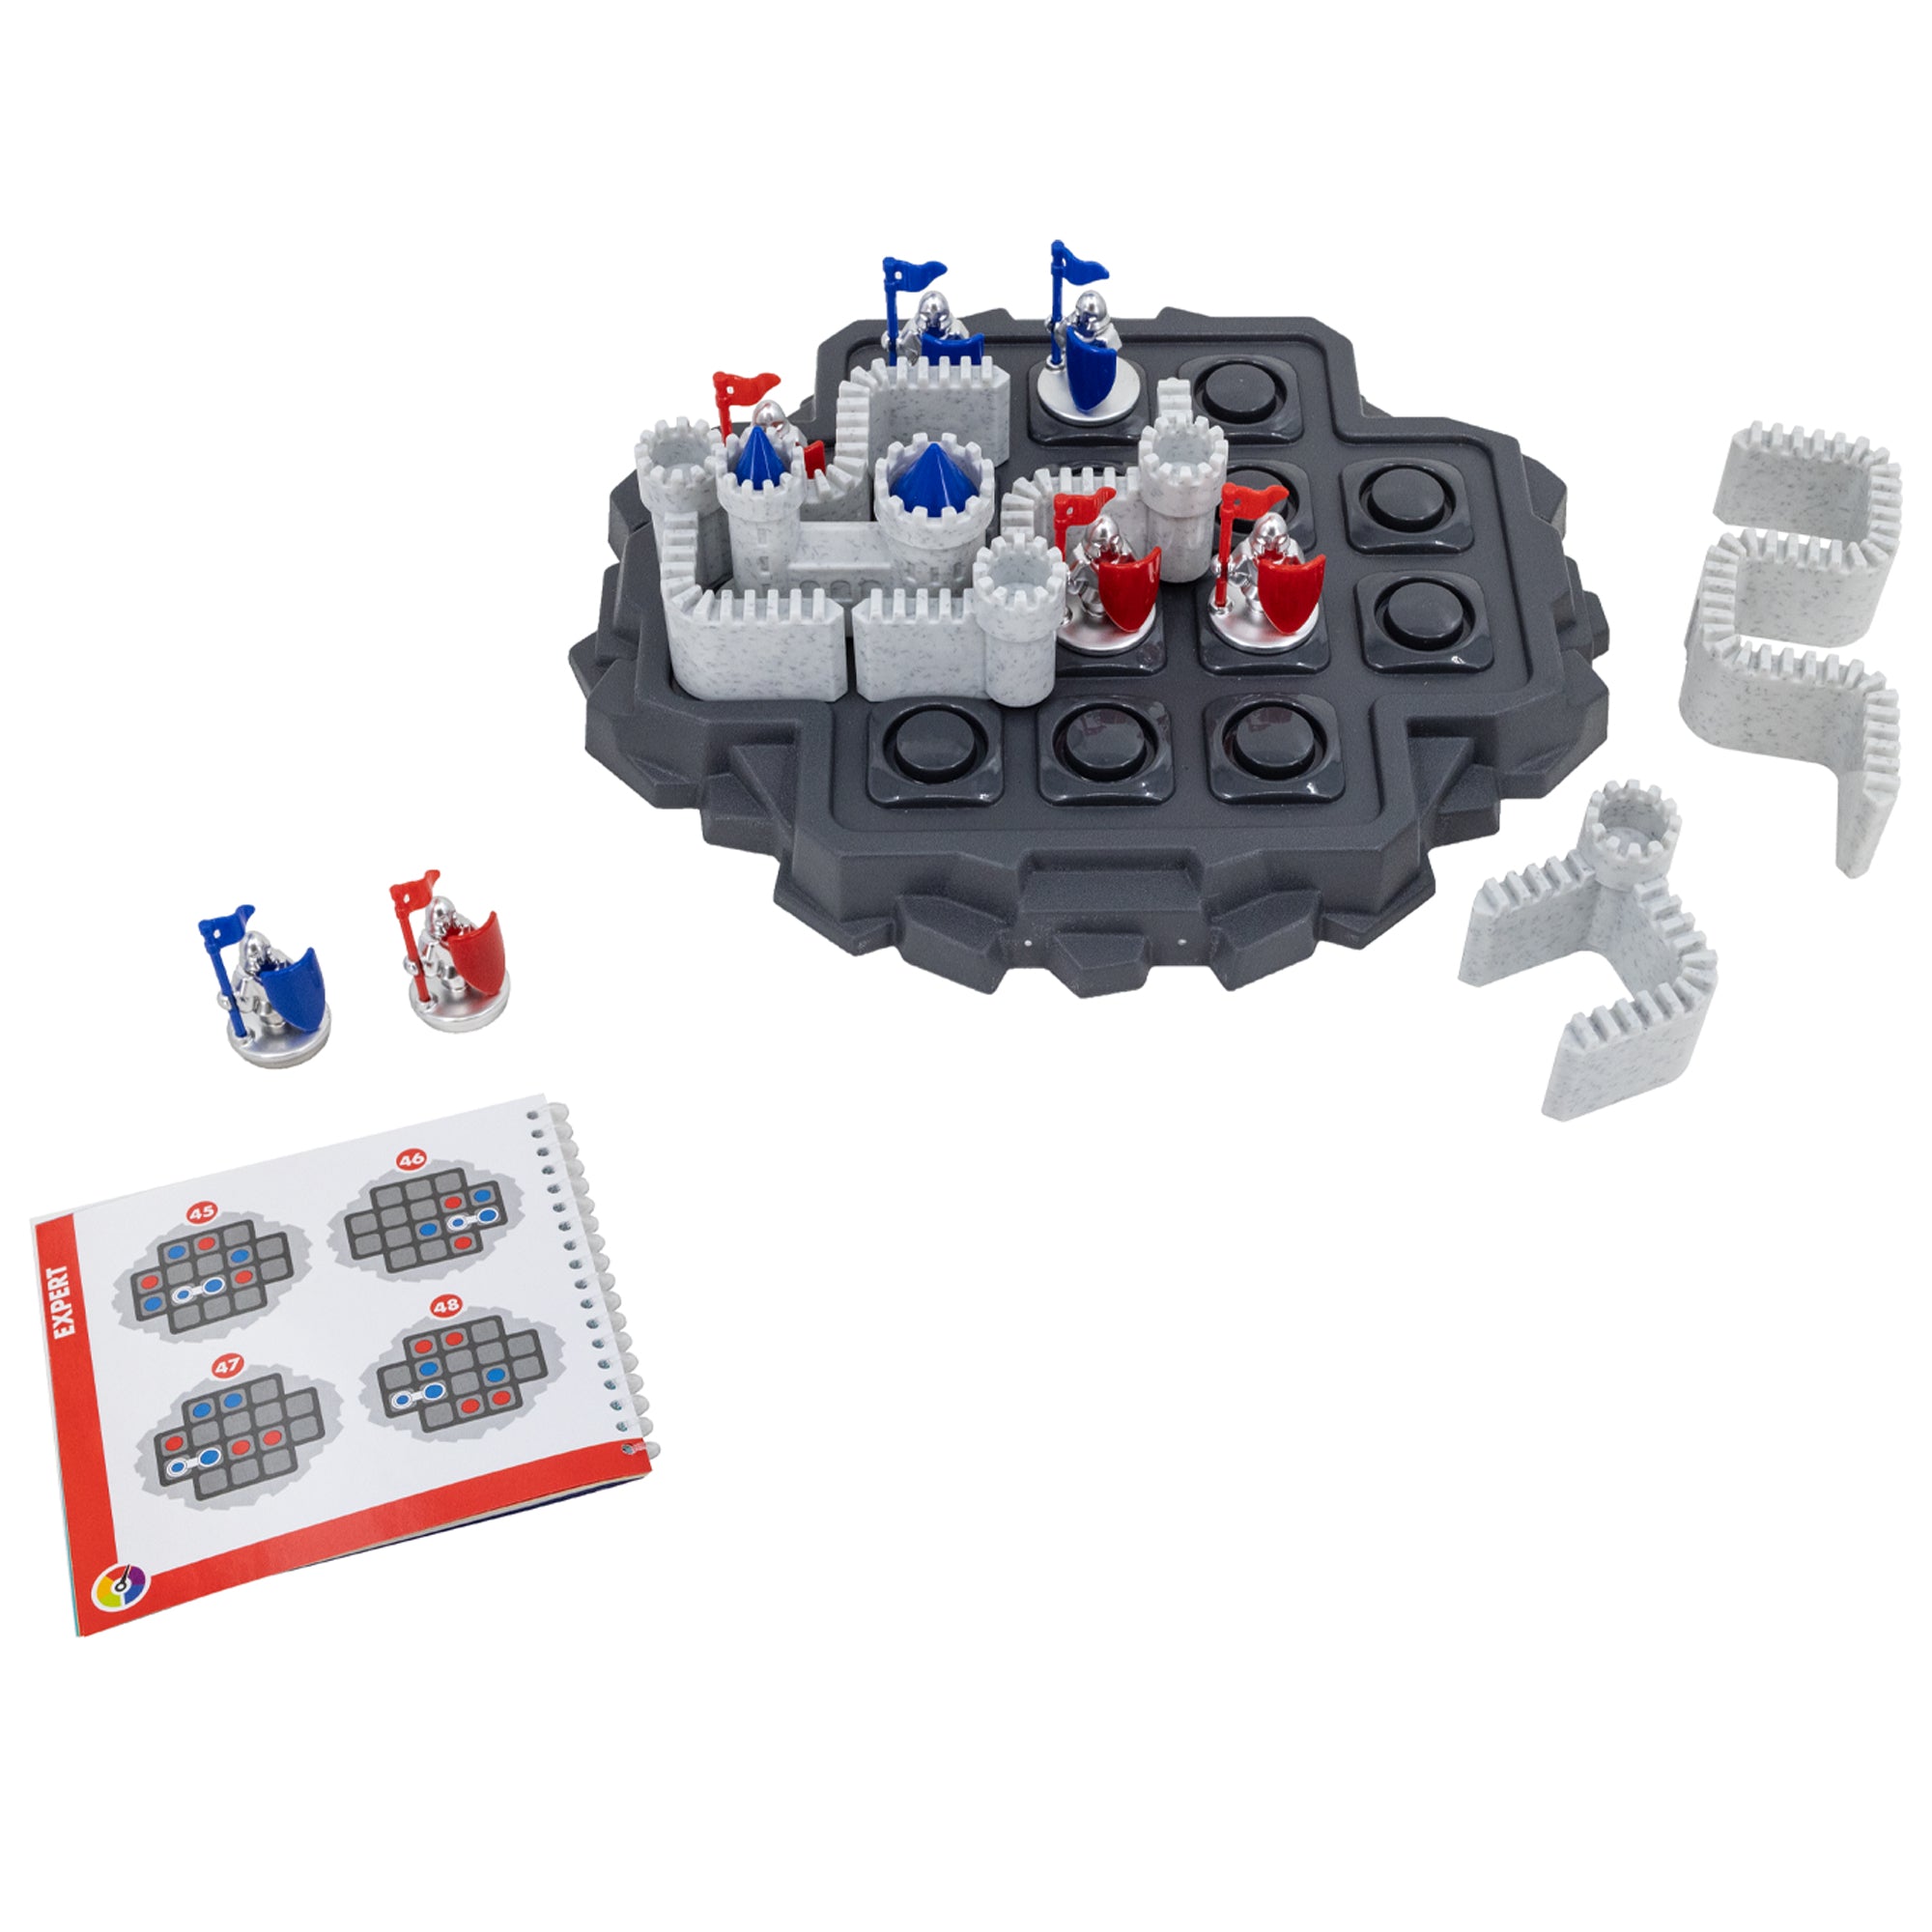 Walls & Warriors game. The game base looks like a gray rock island with circles cut into squares on the top, allowing game pieces to be put in place. There are castle wall pieces and silver knight pieces with red and blue flags and shields. There are 3 castle wall pieces, 2 blue knights, and 3 red knight pieces on the board. Off to the sides are 2 more castle wall pieces and 2 knight pieces. To the bottom-left is the instruction booklet open to show an expert challenge.